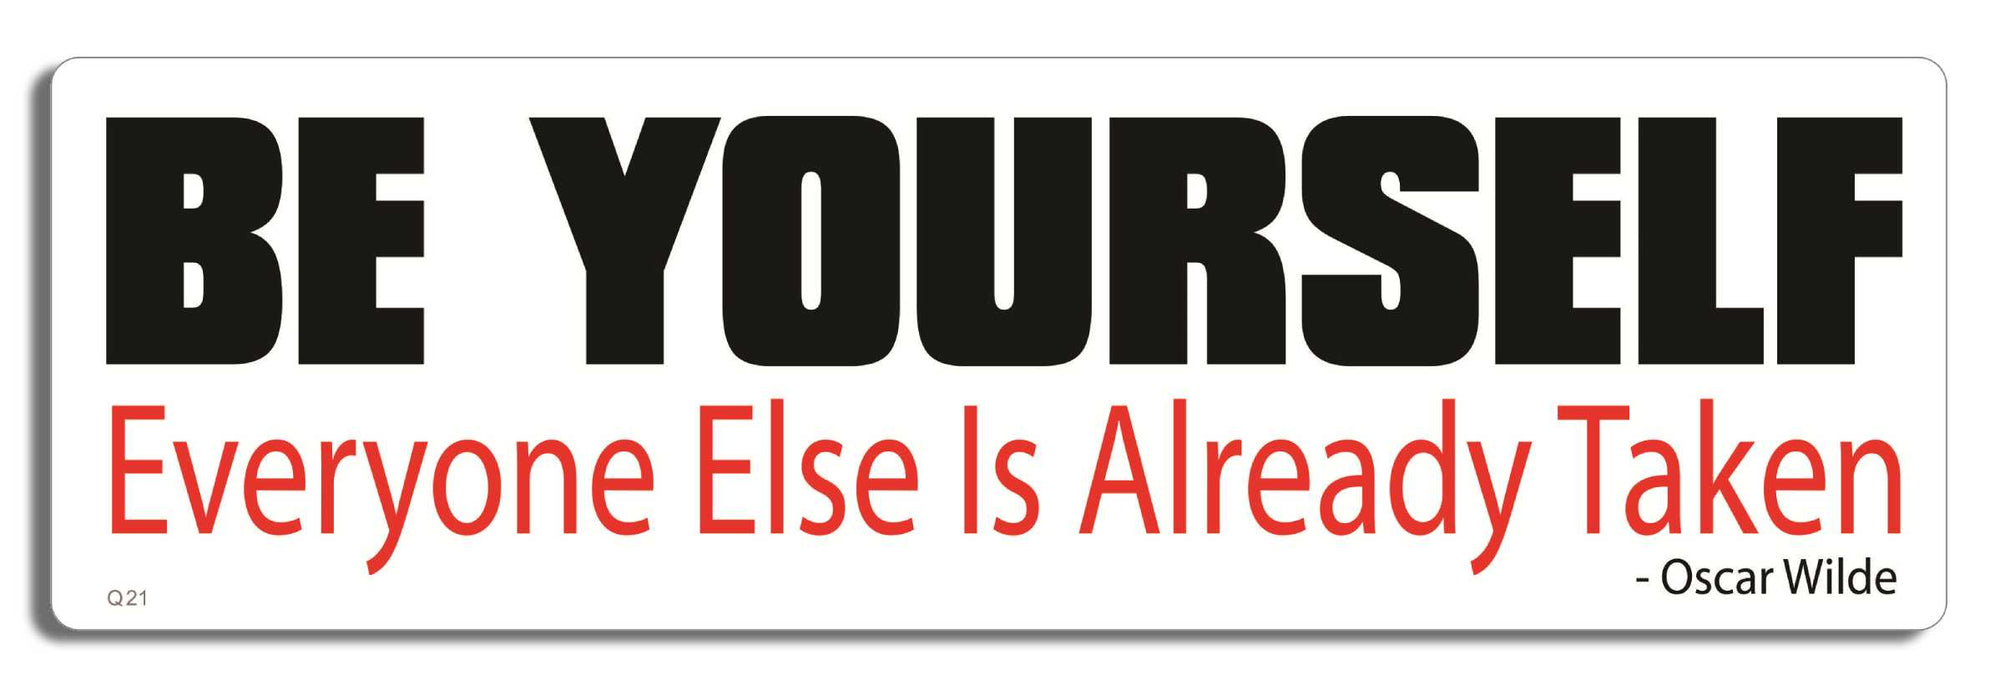 Be yourself. Everyone else is already taken - Oscar Wilde - 3" x 10" Bumper Sticker--Car Magnet- -  Decal Bumper Sticker-quotation Bumper Sticker Car Magnet Be yourself. Everyone else is already-  Decal for carsquotation, quote